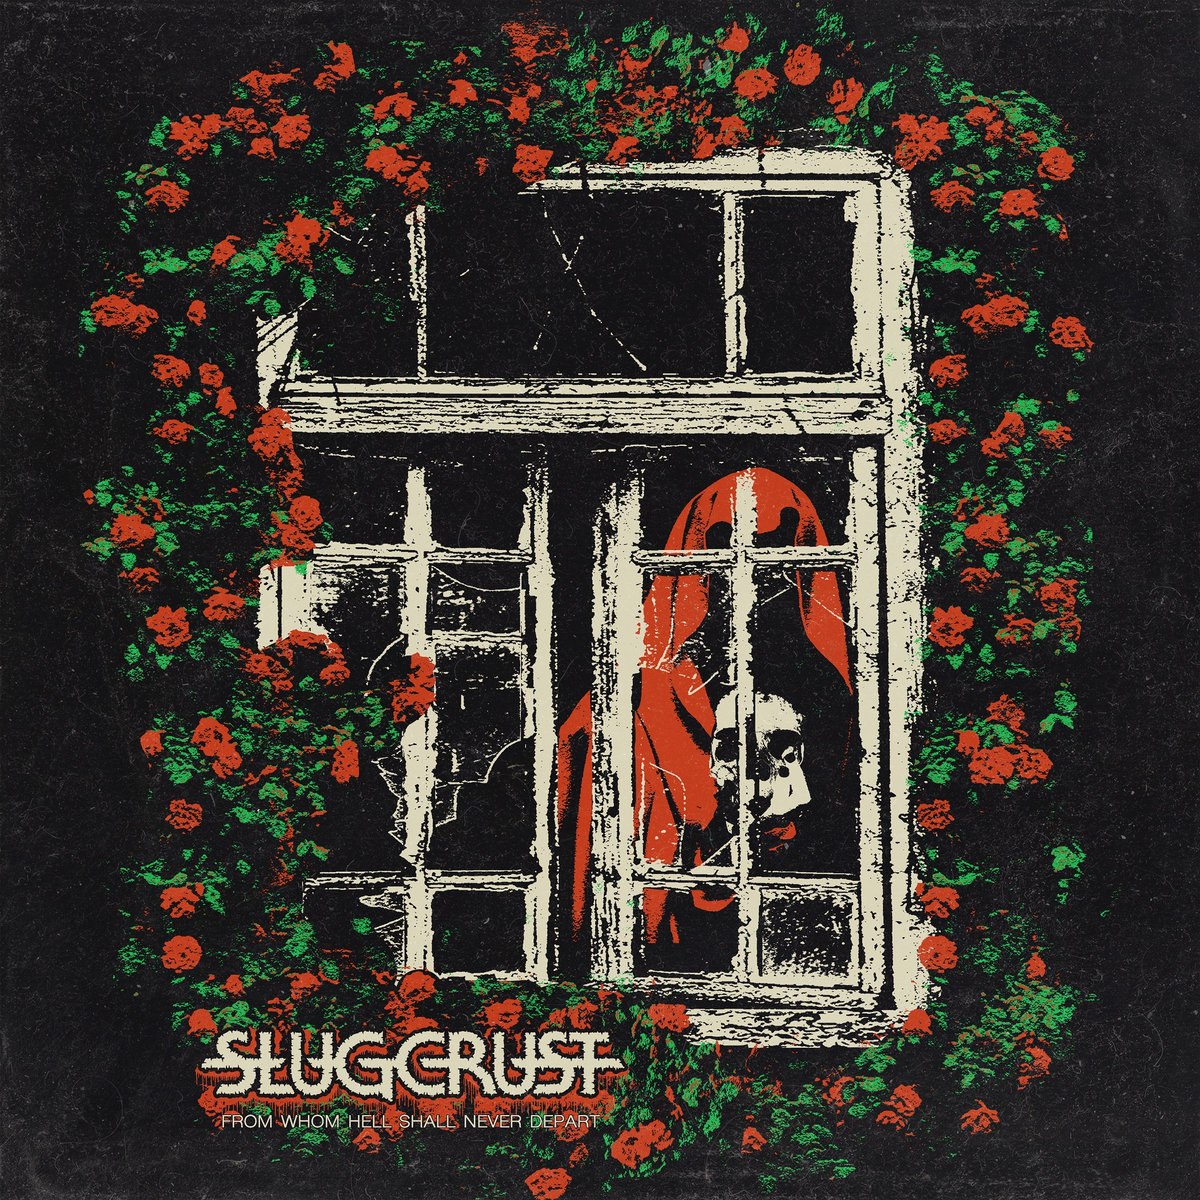 Slugcrust - "From Whom Hell Shall Never Depart" - 2022